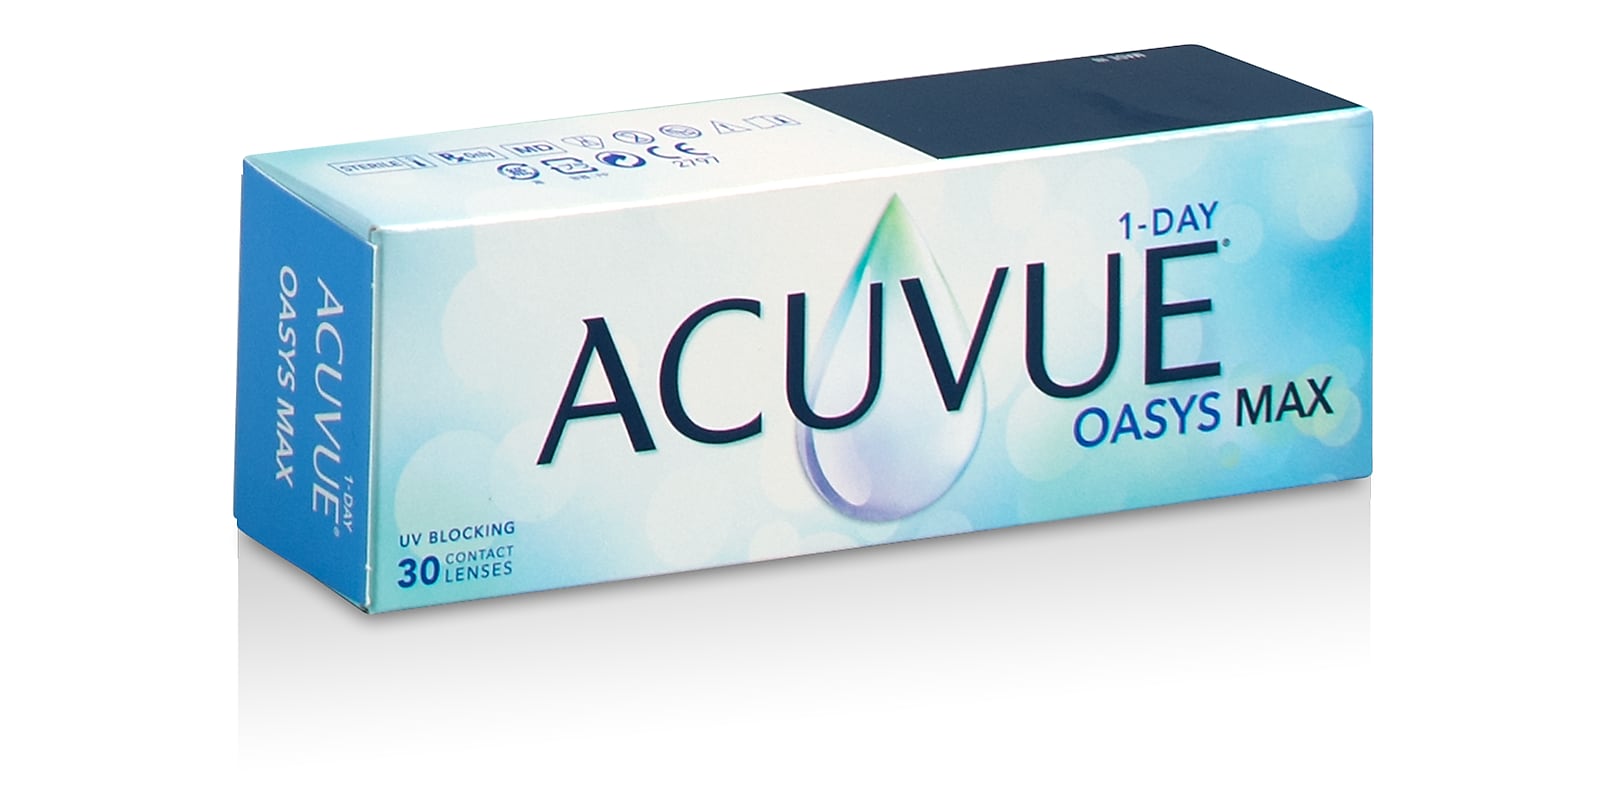 ACUVUE® OASYS MAX 1-Day Sphere, 30 pack contact lenses